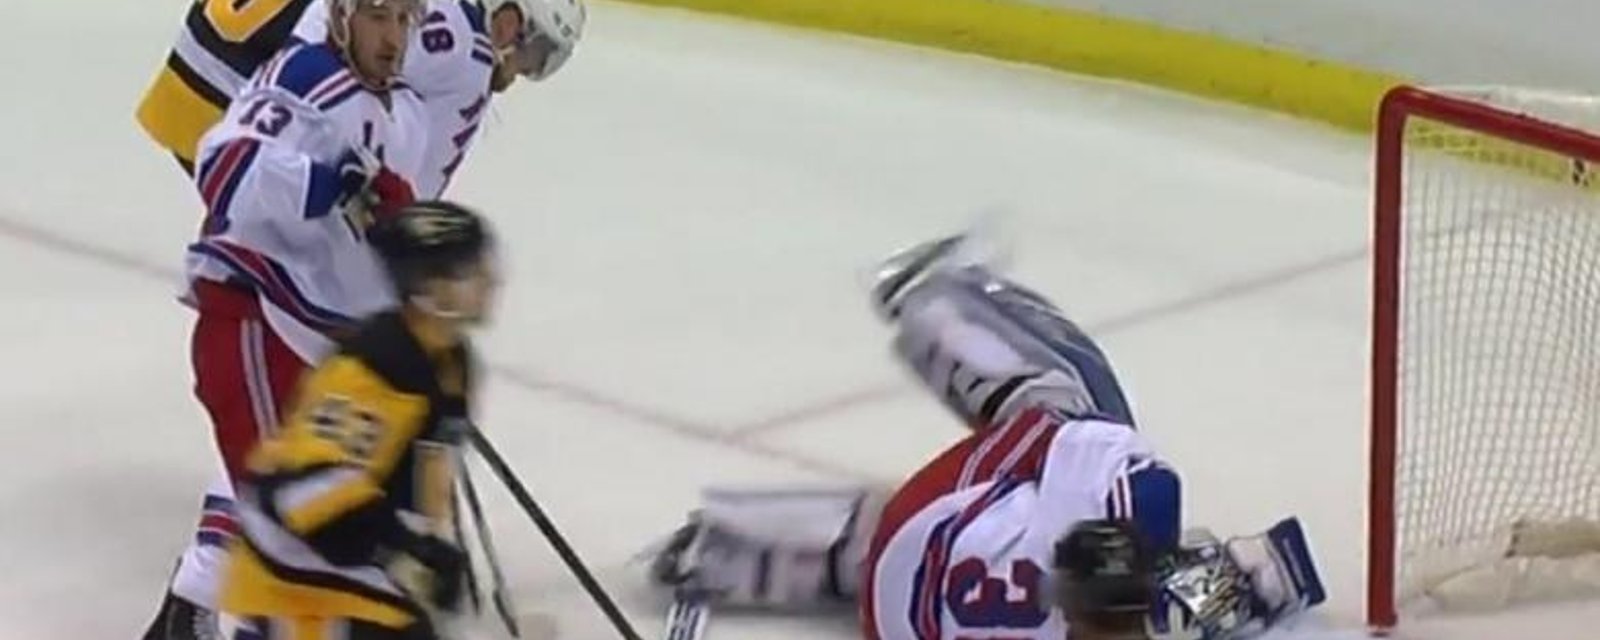 Lundqvist gives up a goal after being poked in the eye by his teammate.